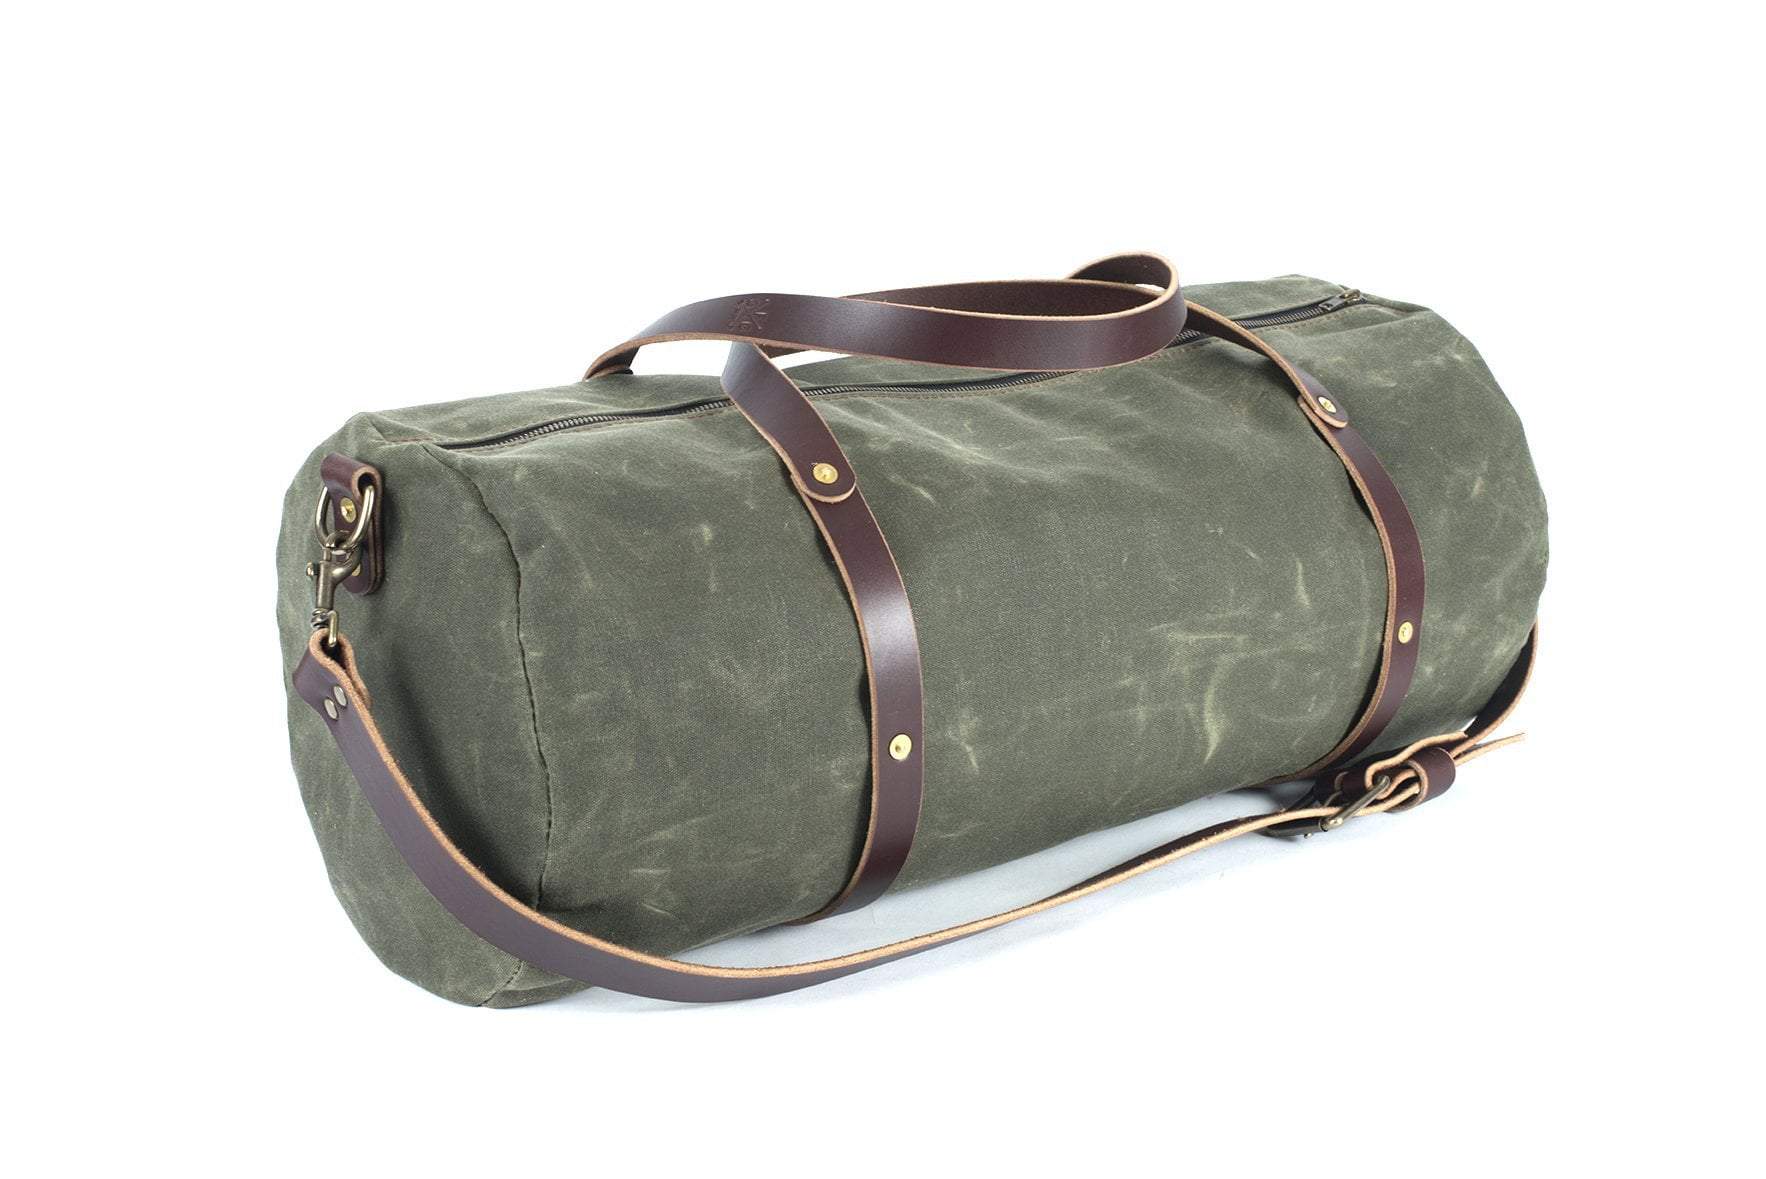 Campaign Waxed Canvas Large Duffle Bag